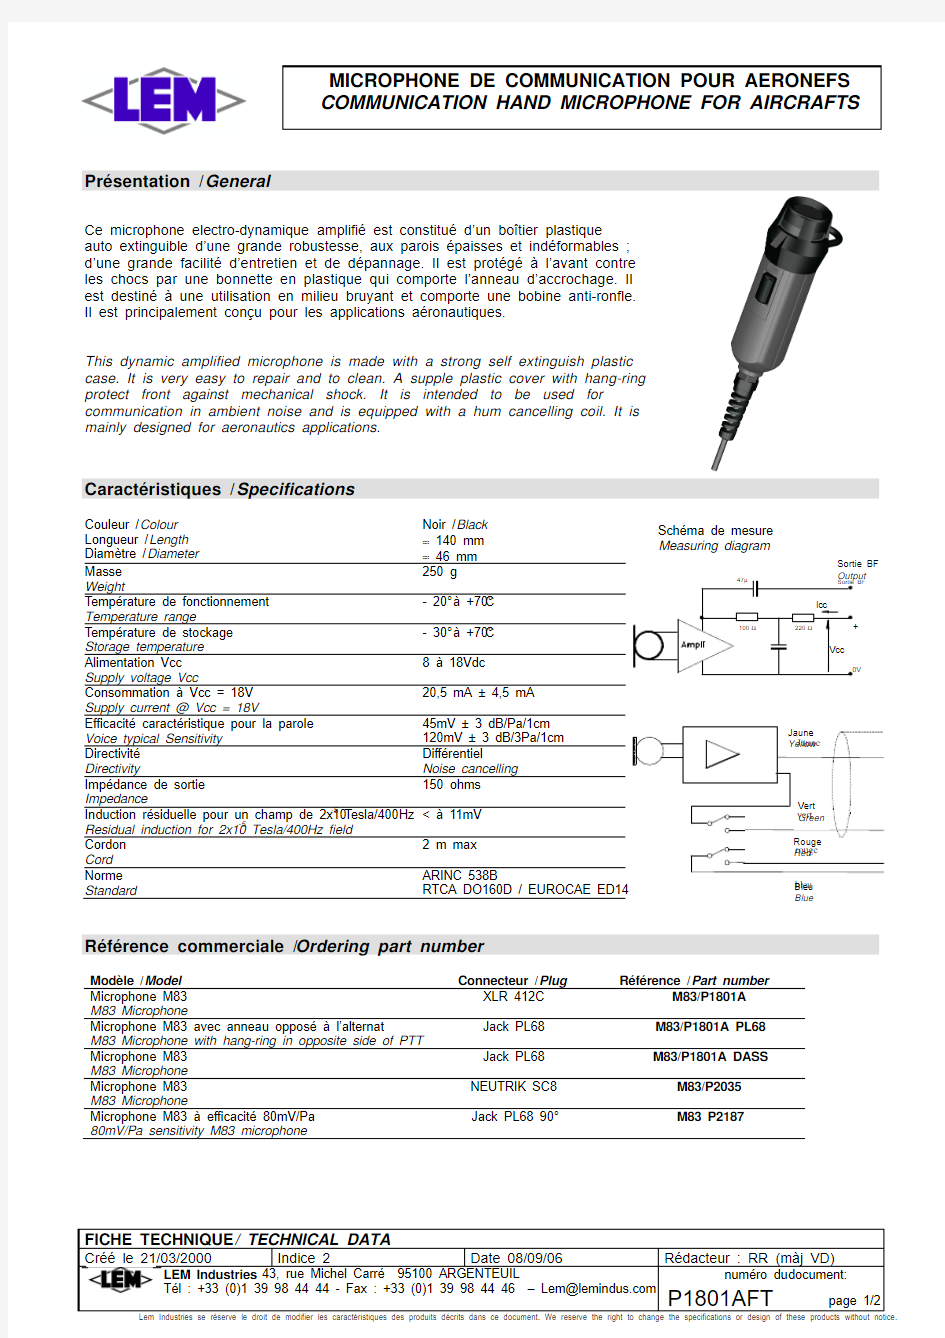 Microphone Datasheet - Material Specification